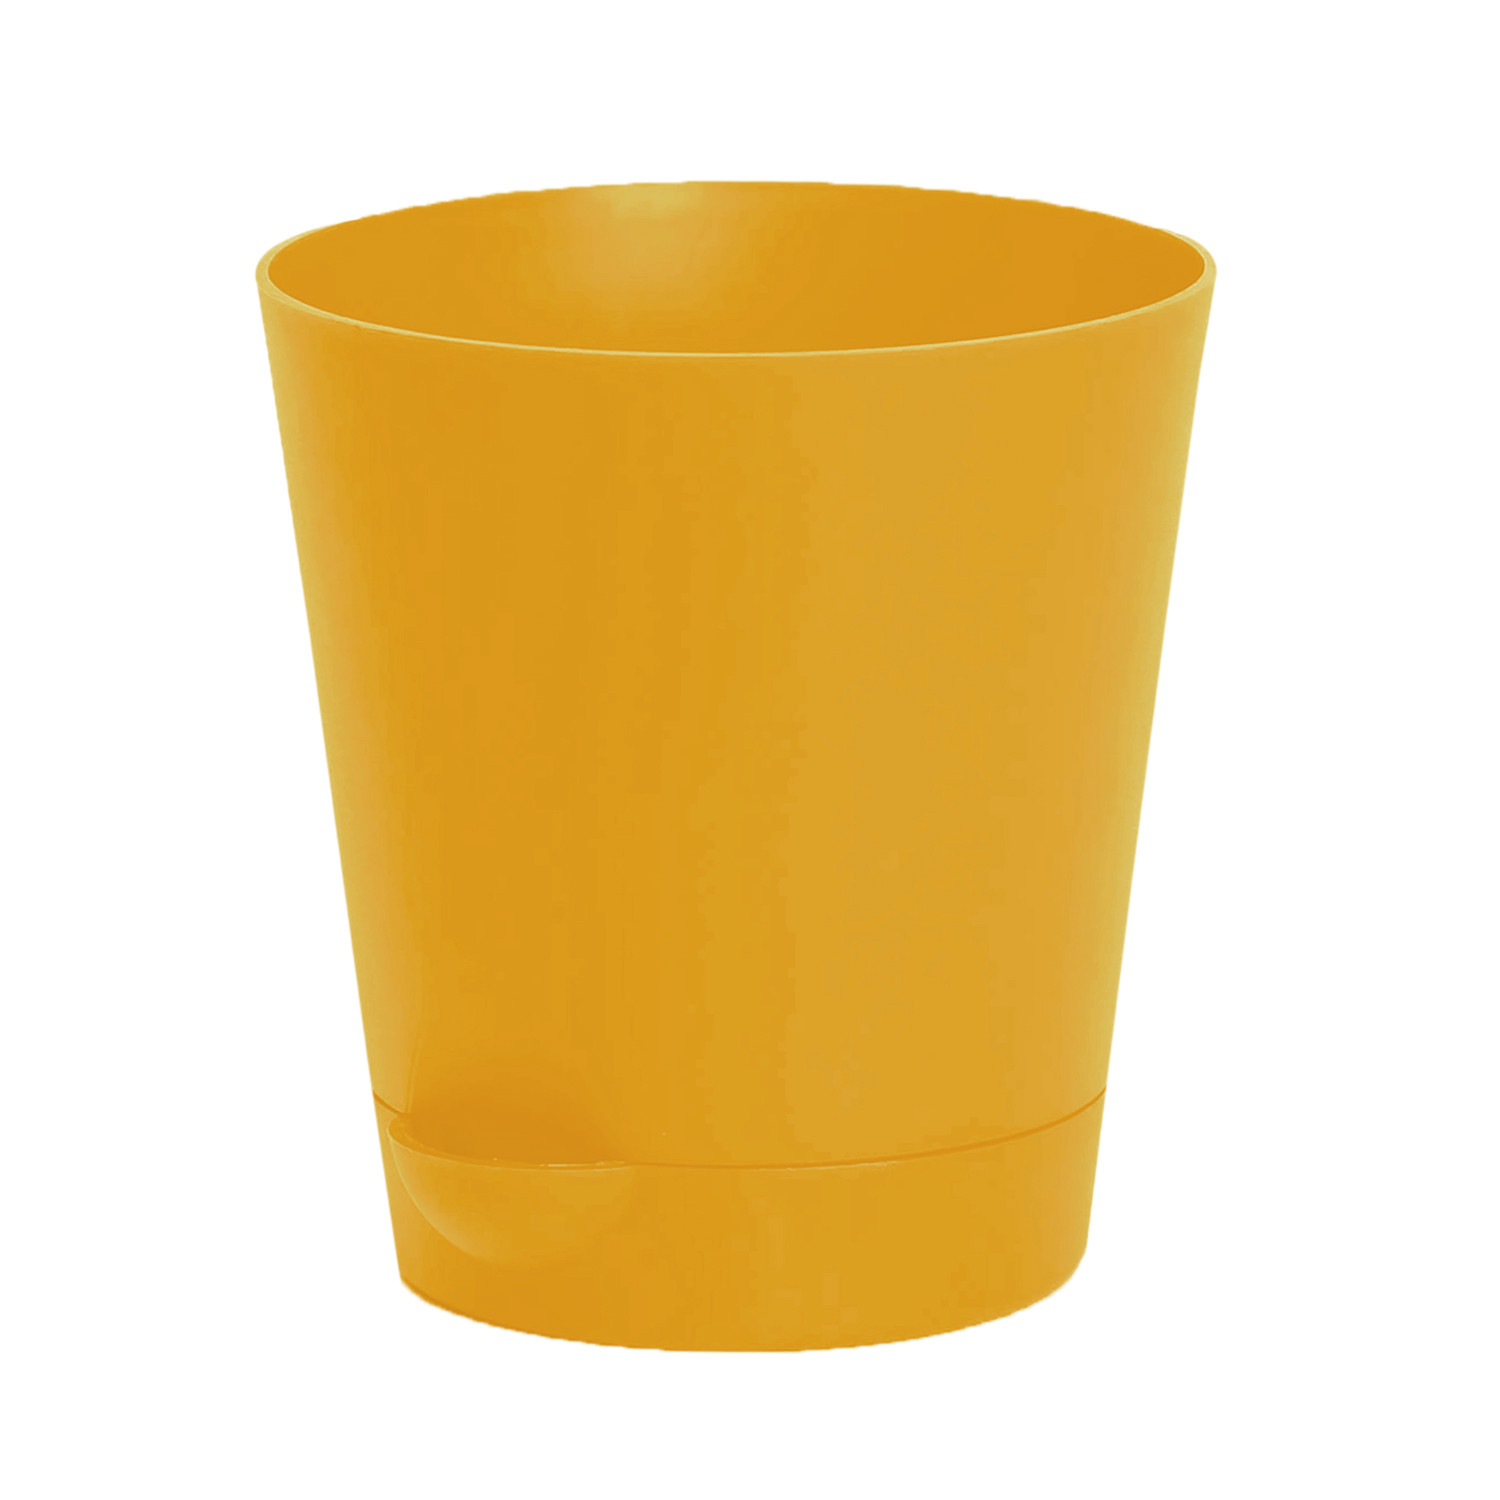 Kuber Industries Plastic Titan Pot|Garden Container For Plants & Flowers|Self-Watering Pot With Drainage Holes,6 Inch (Yellow)